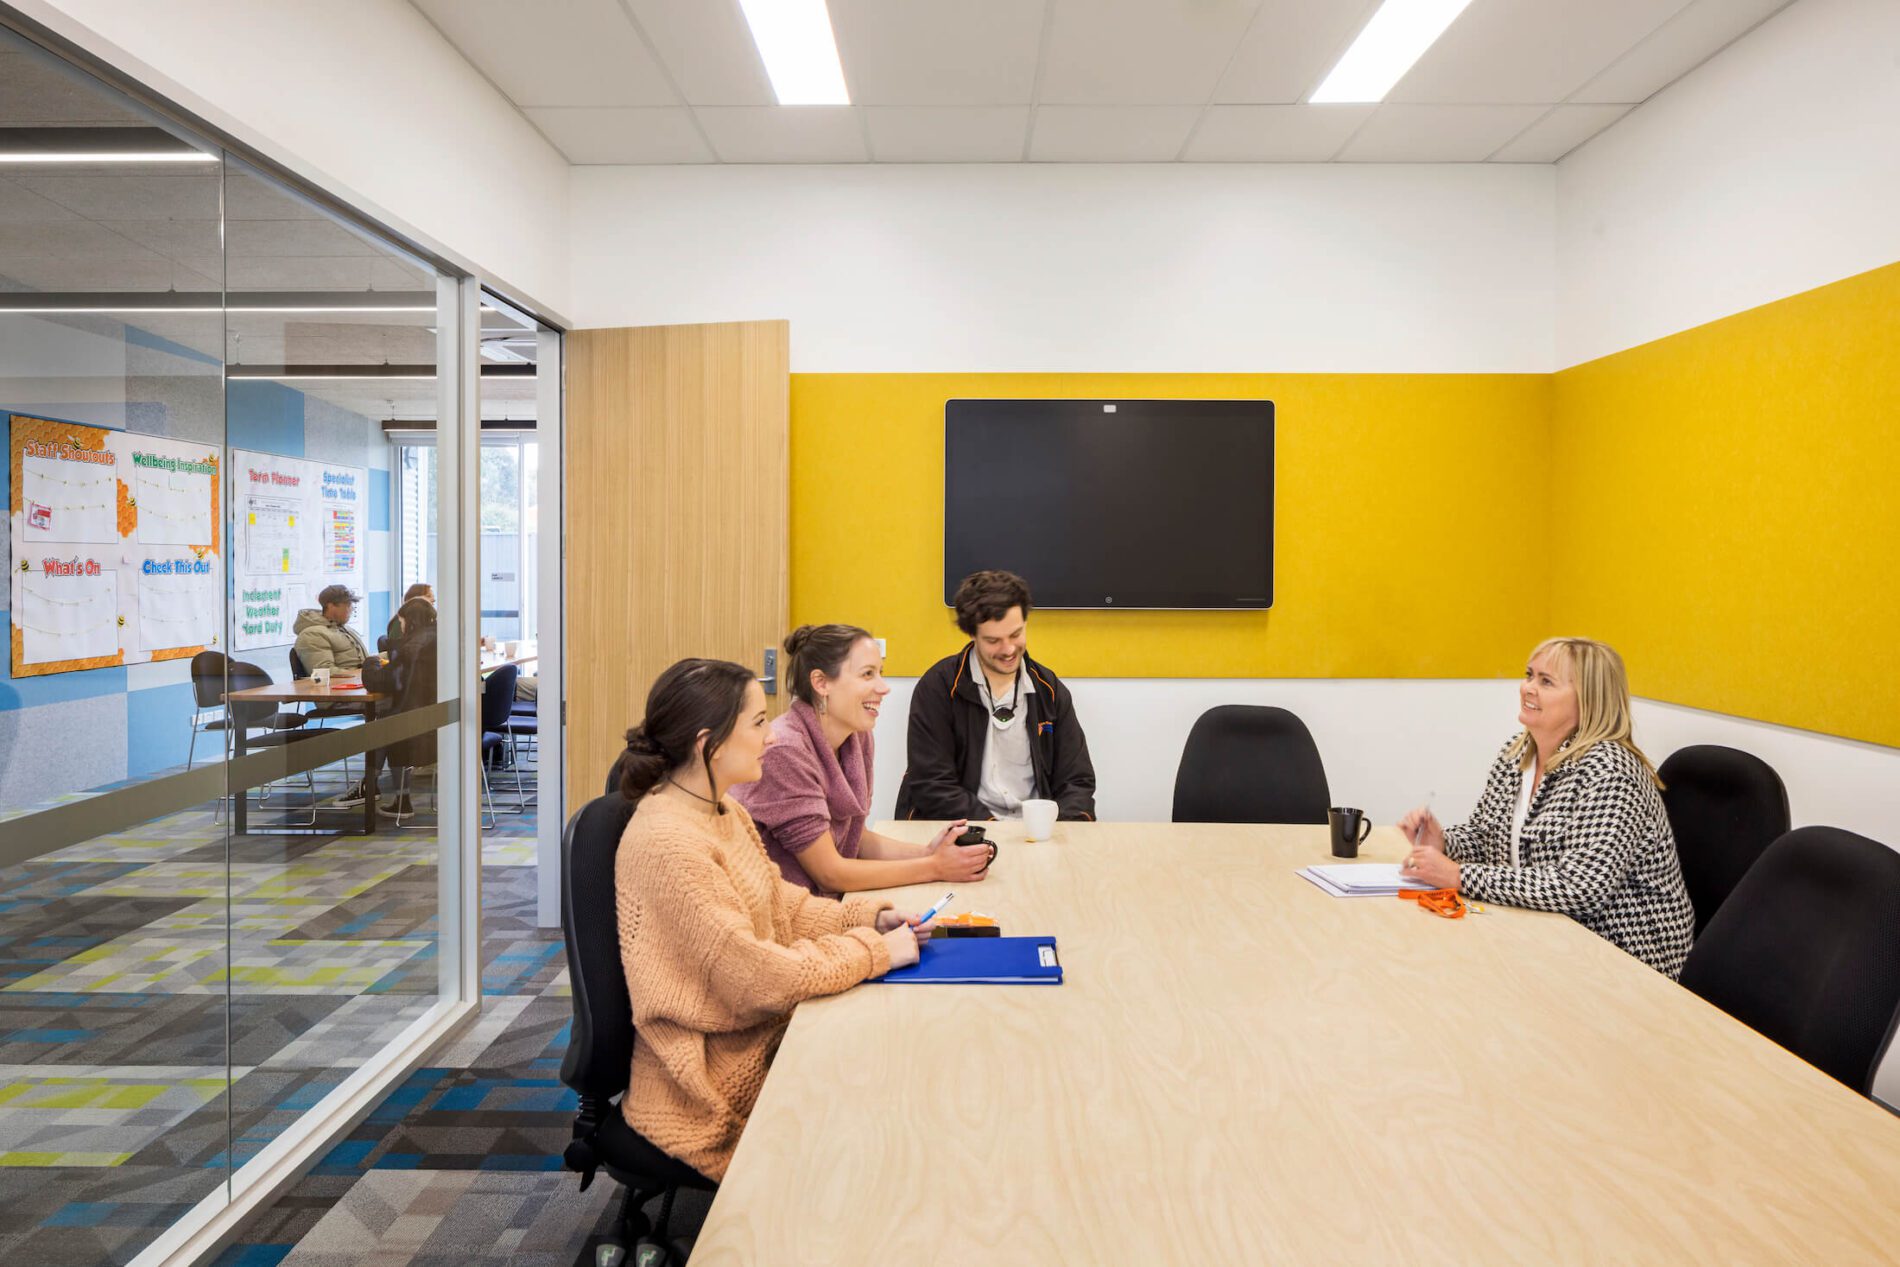 Four school staff sit at table in meeting room with yellow wall panel detail and television screen